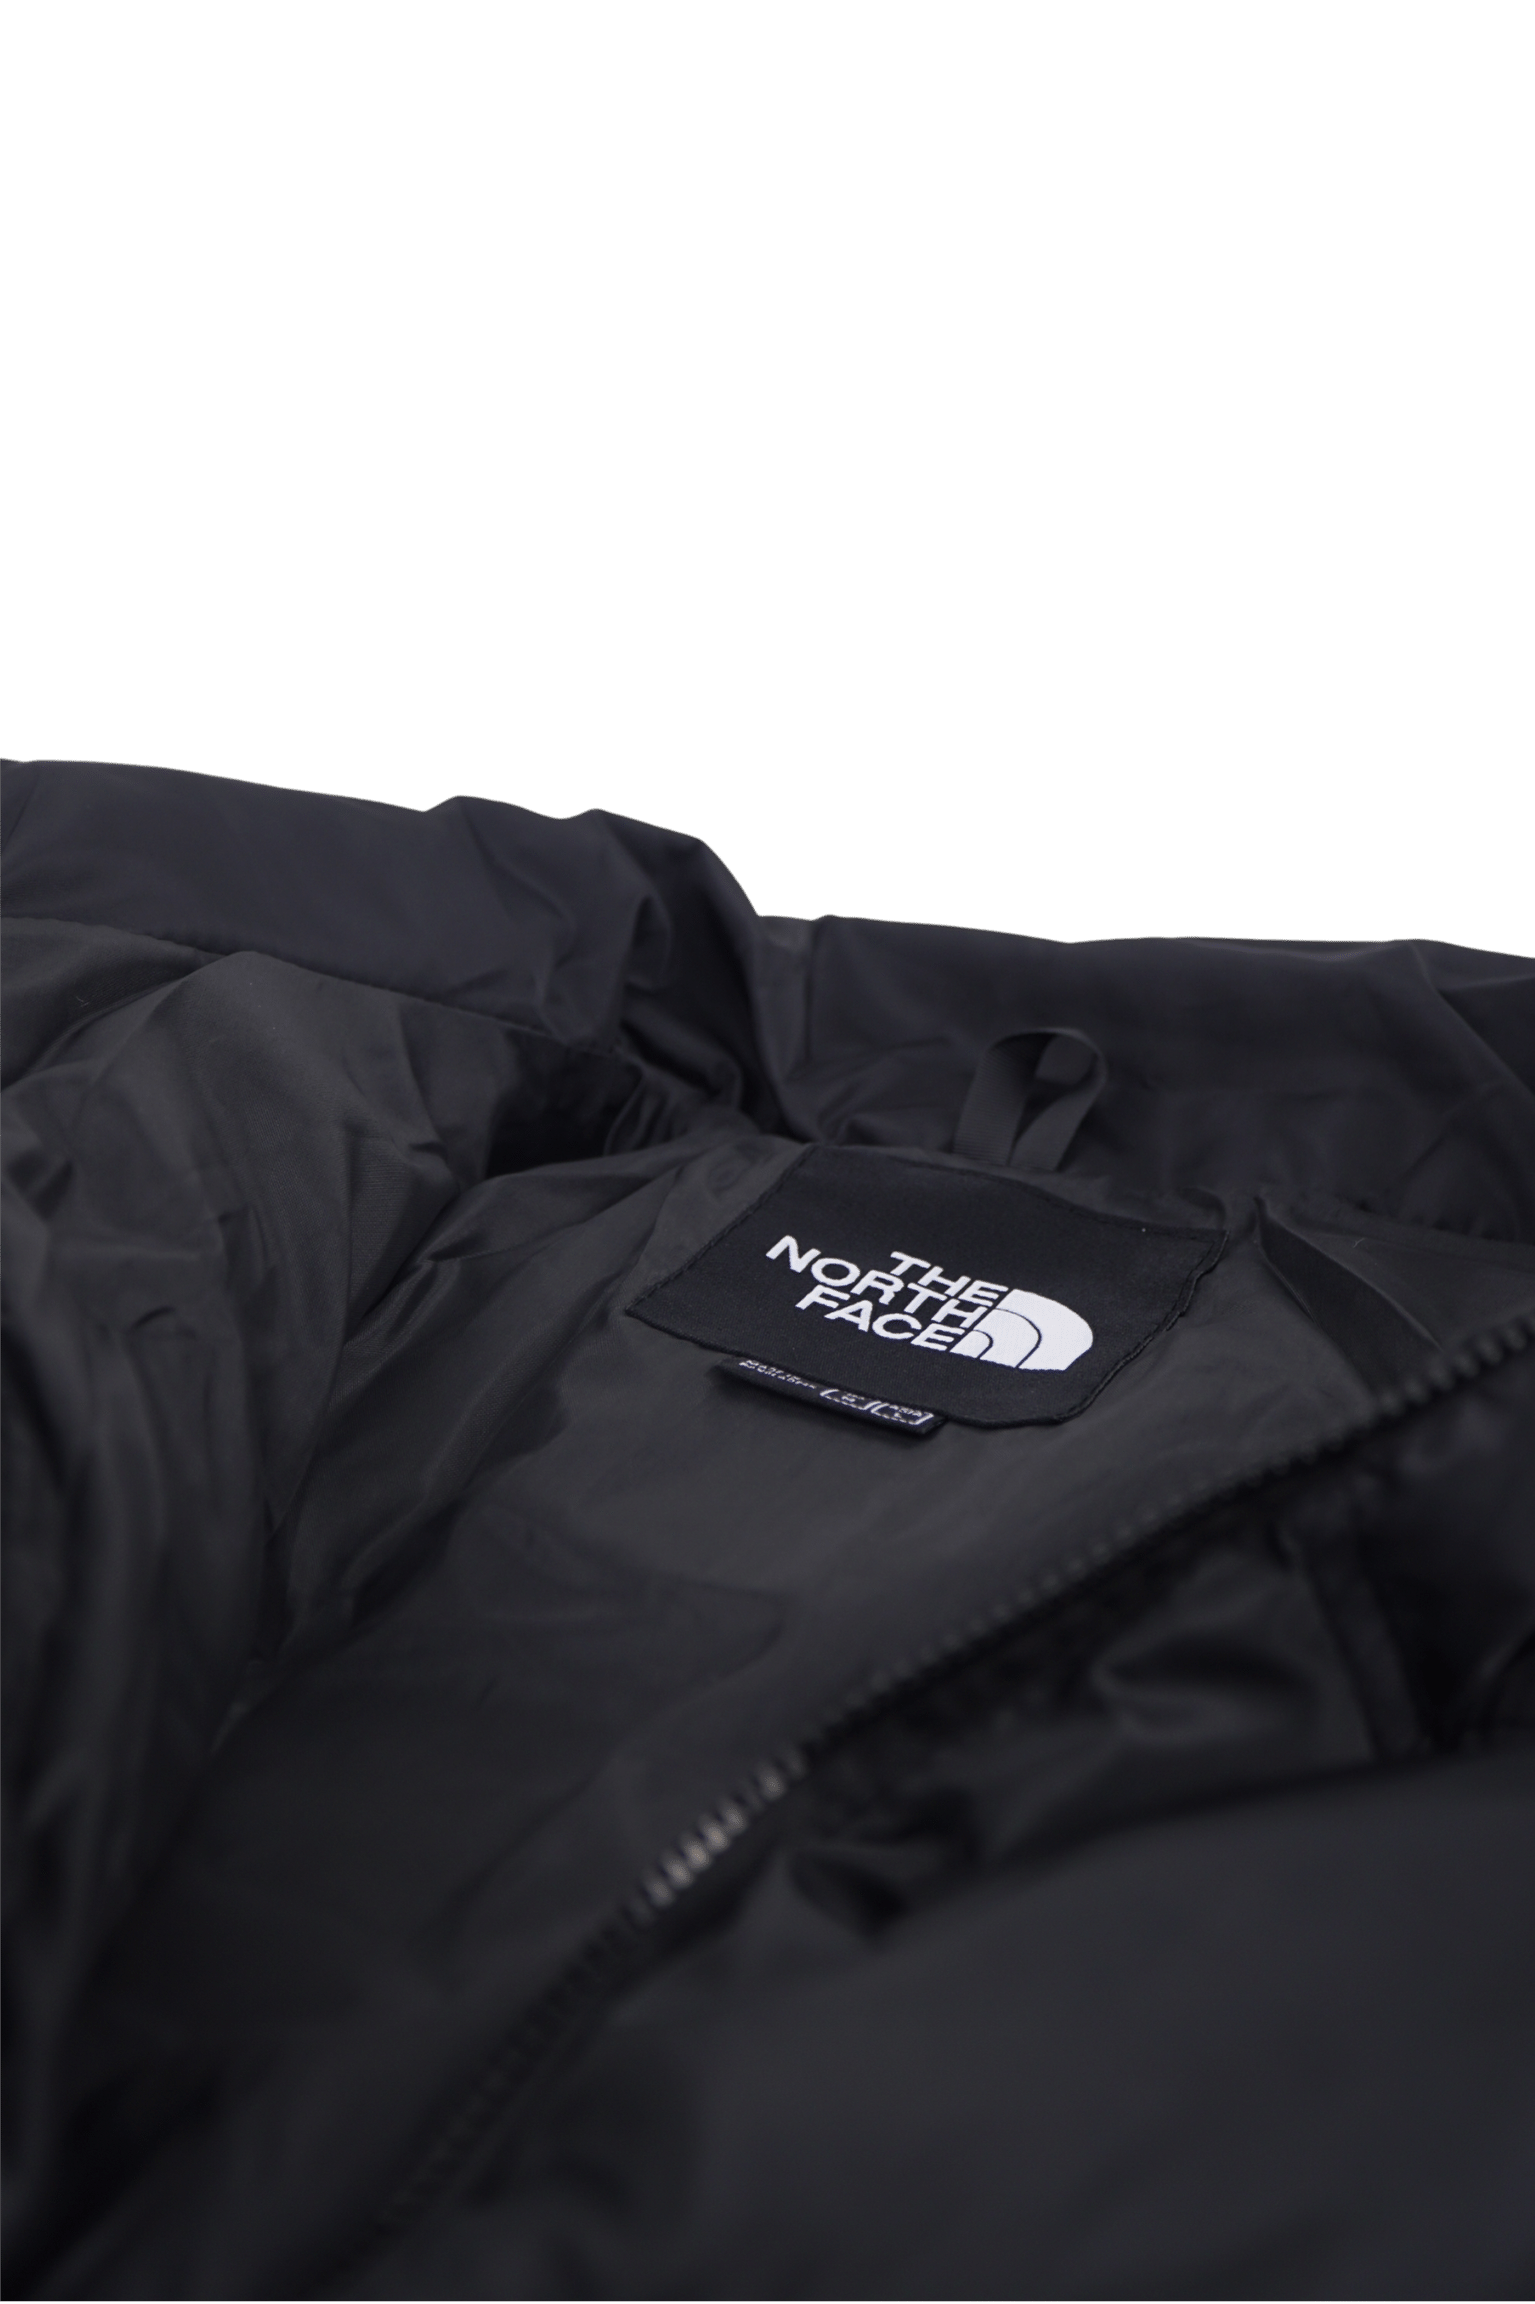 The North Face Black Puffer Jacket – Mizo Jersey Home